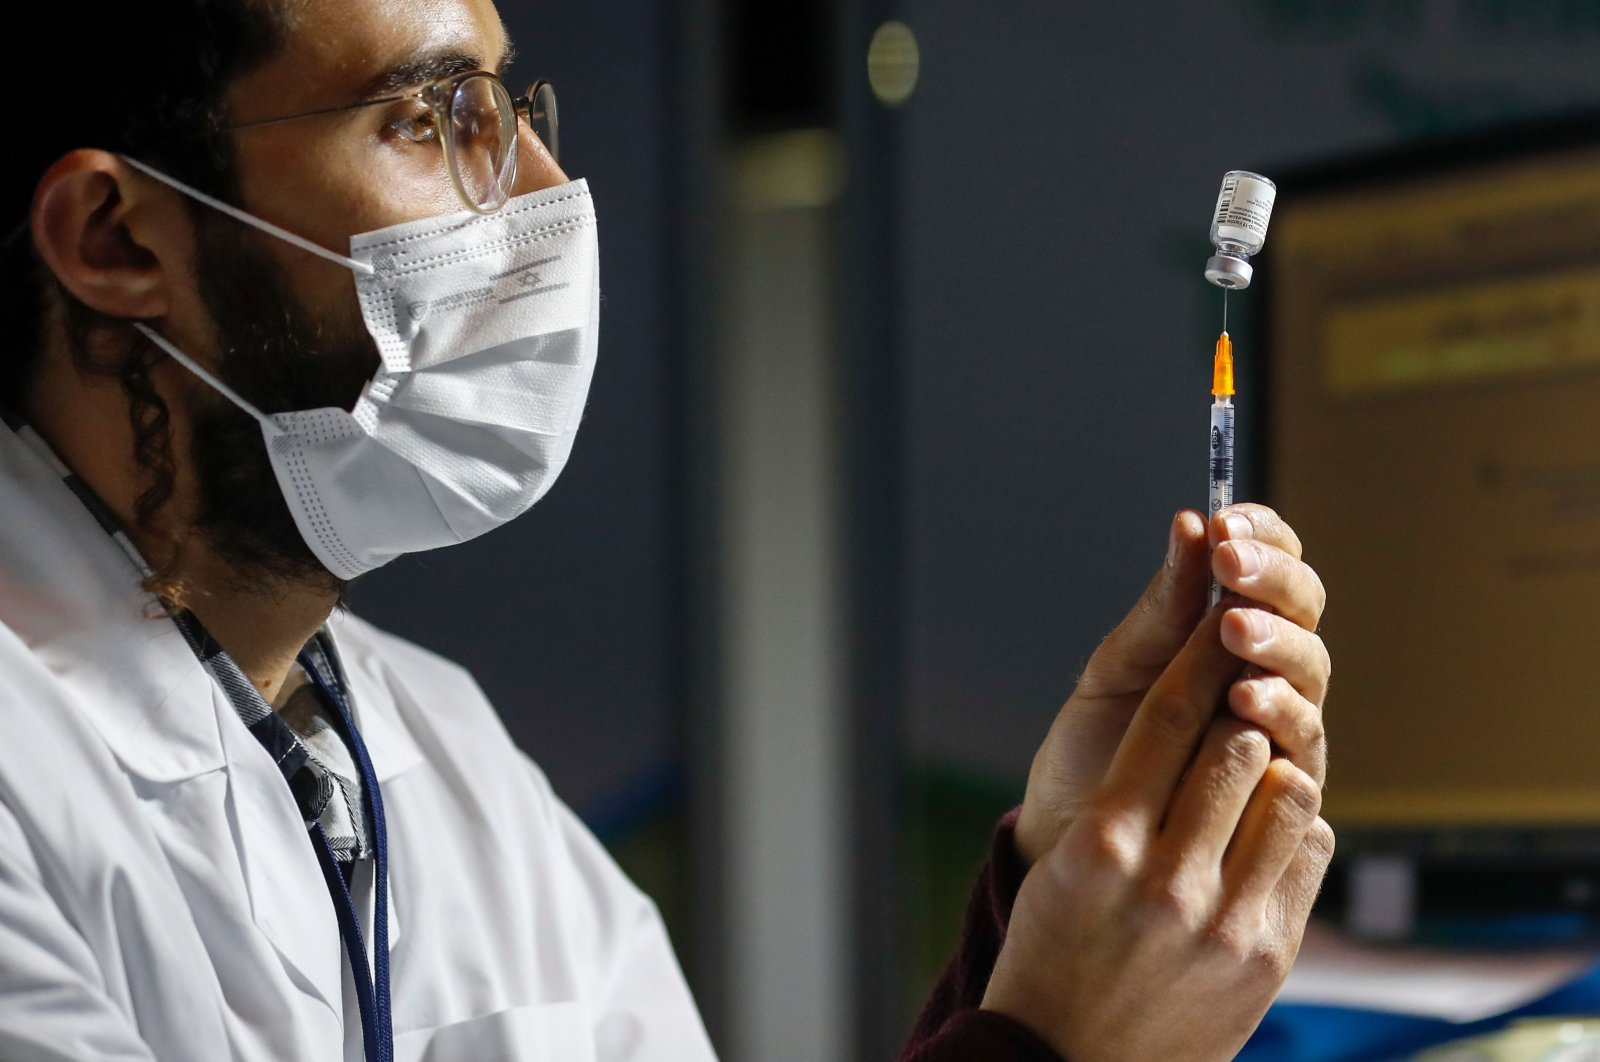 An Israeli healthcare worker prepares a dose of the COVID-19 vaccine for people queuing at the Kupat Holim Clalit clinic in Jerusalem, on January 14, 2021. (AFP Photo)